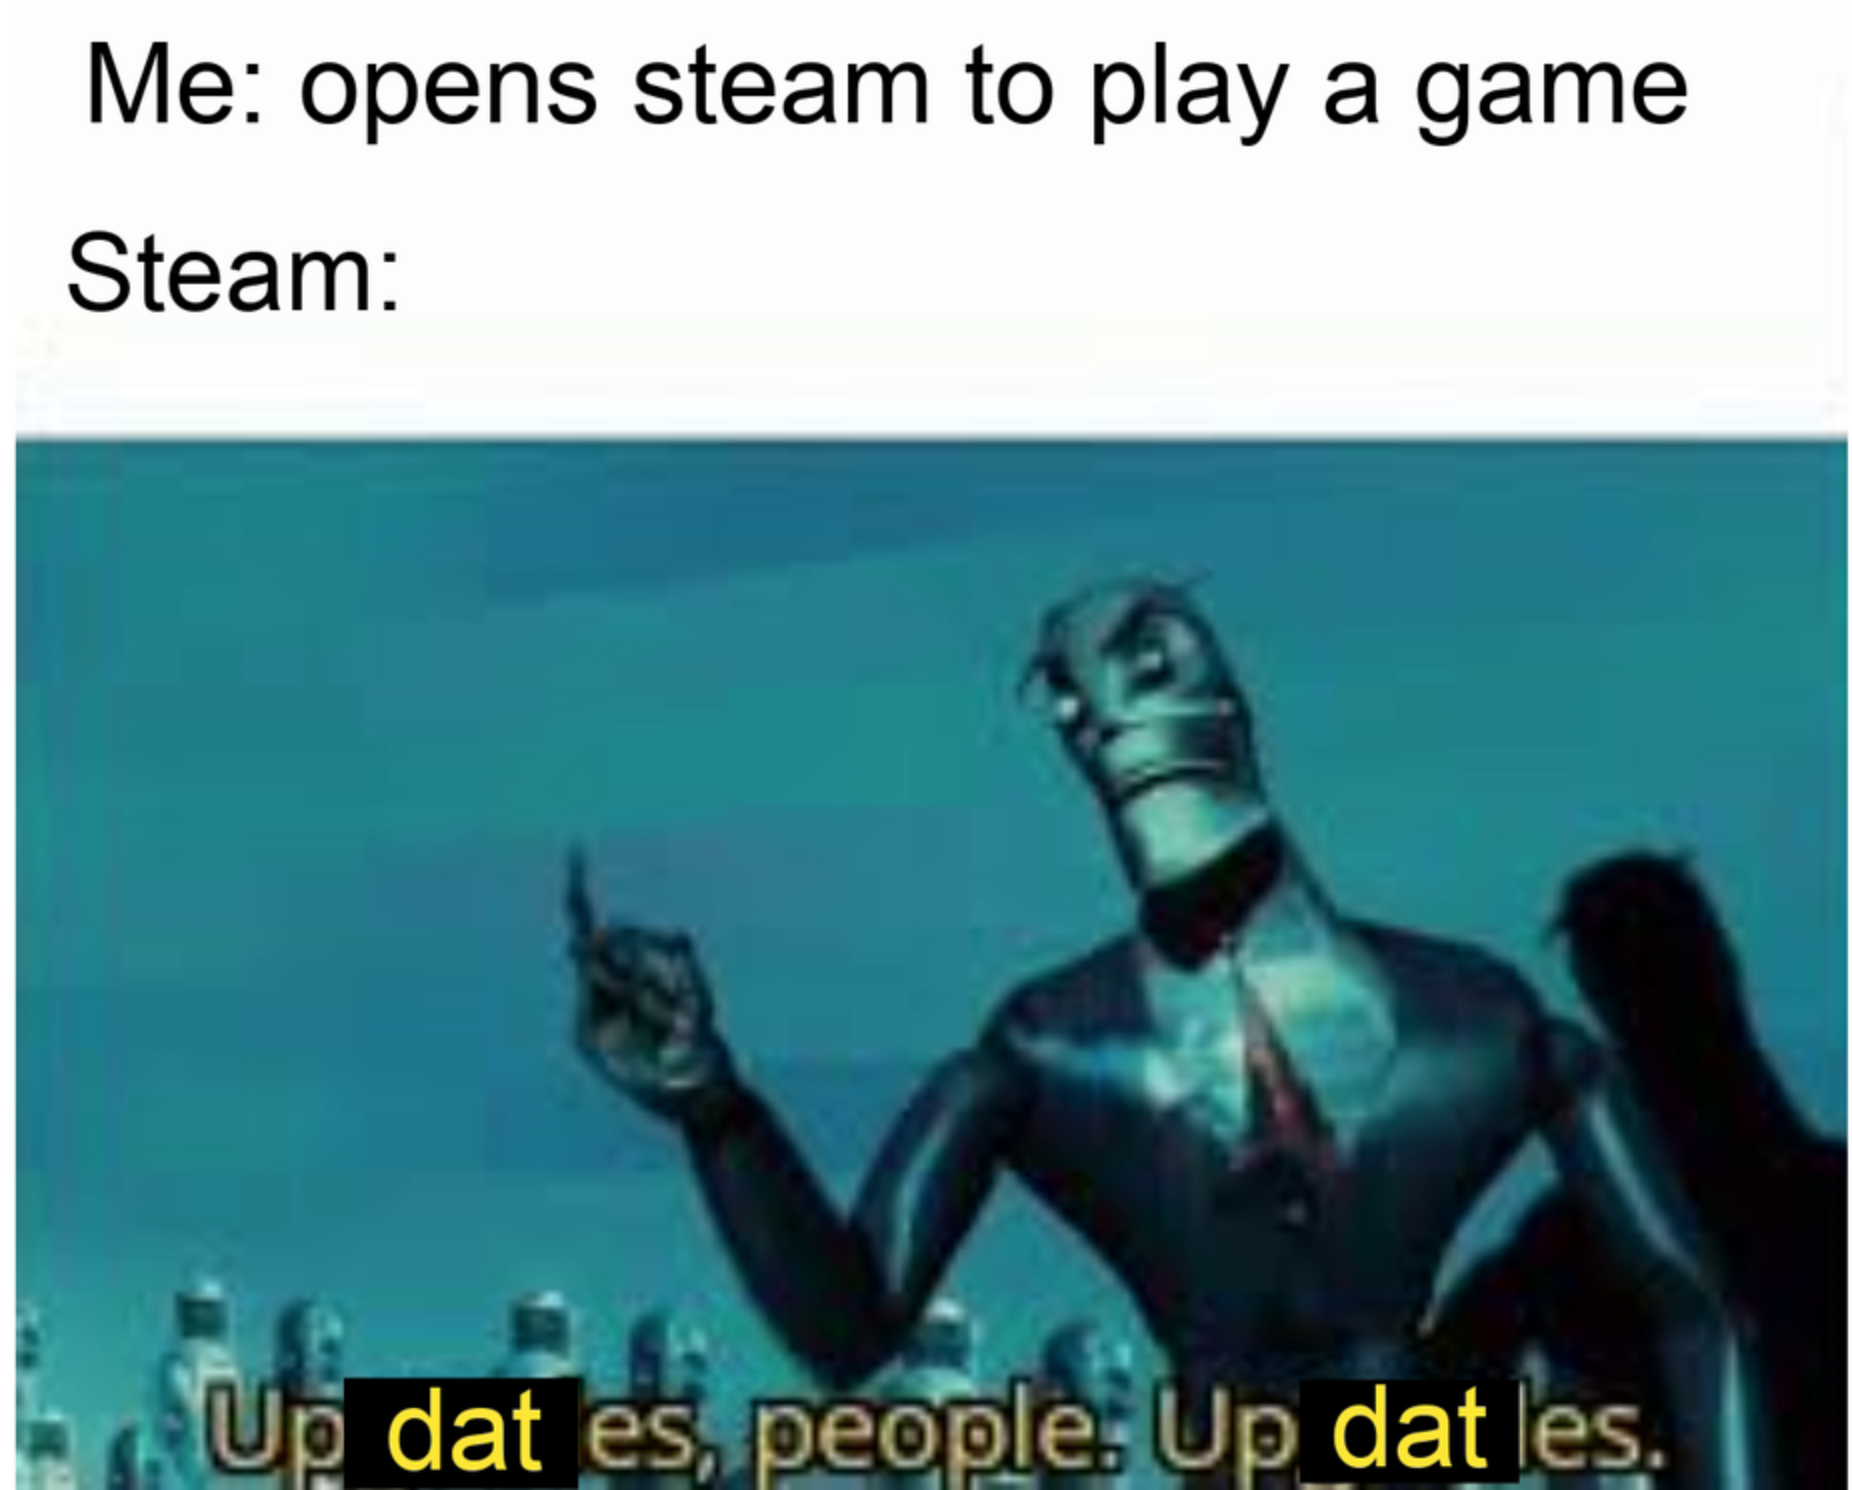 gaming memes and pics - upgrades people upgrades - Me opens steam to play a game Steam Up dat es, people. Up dat les.